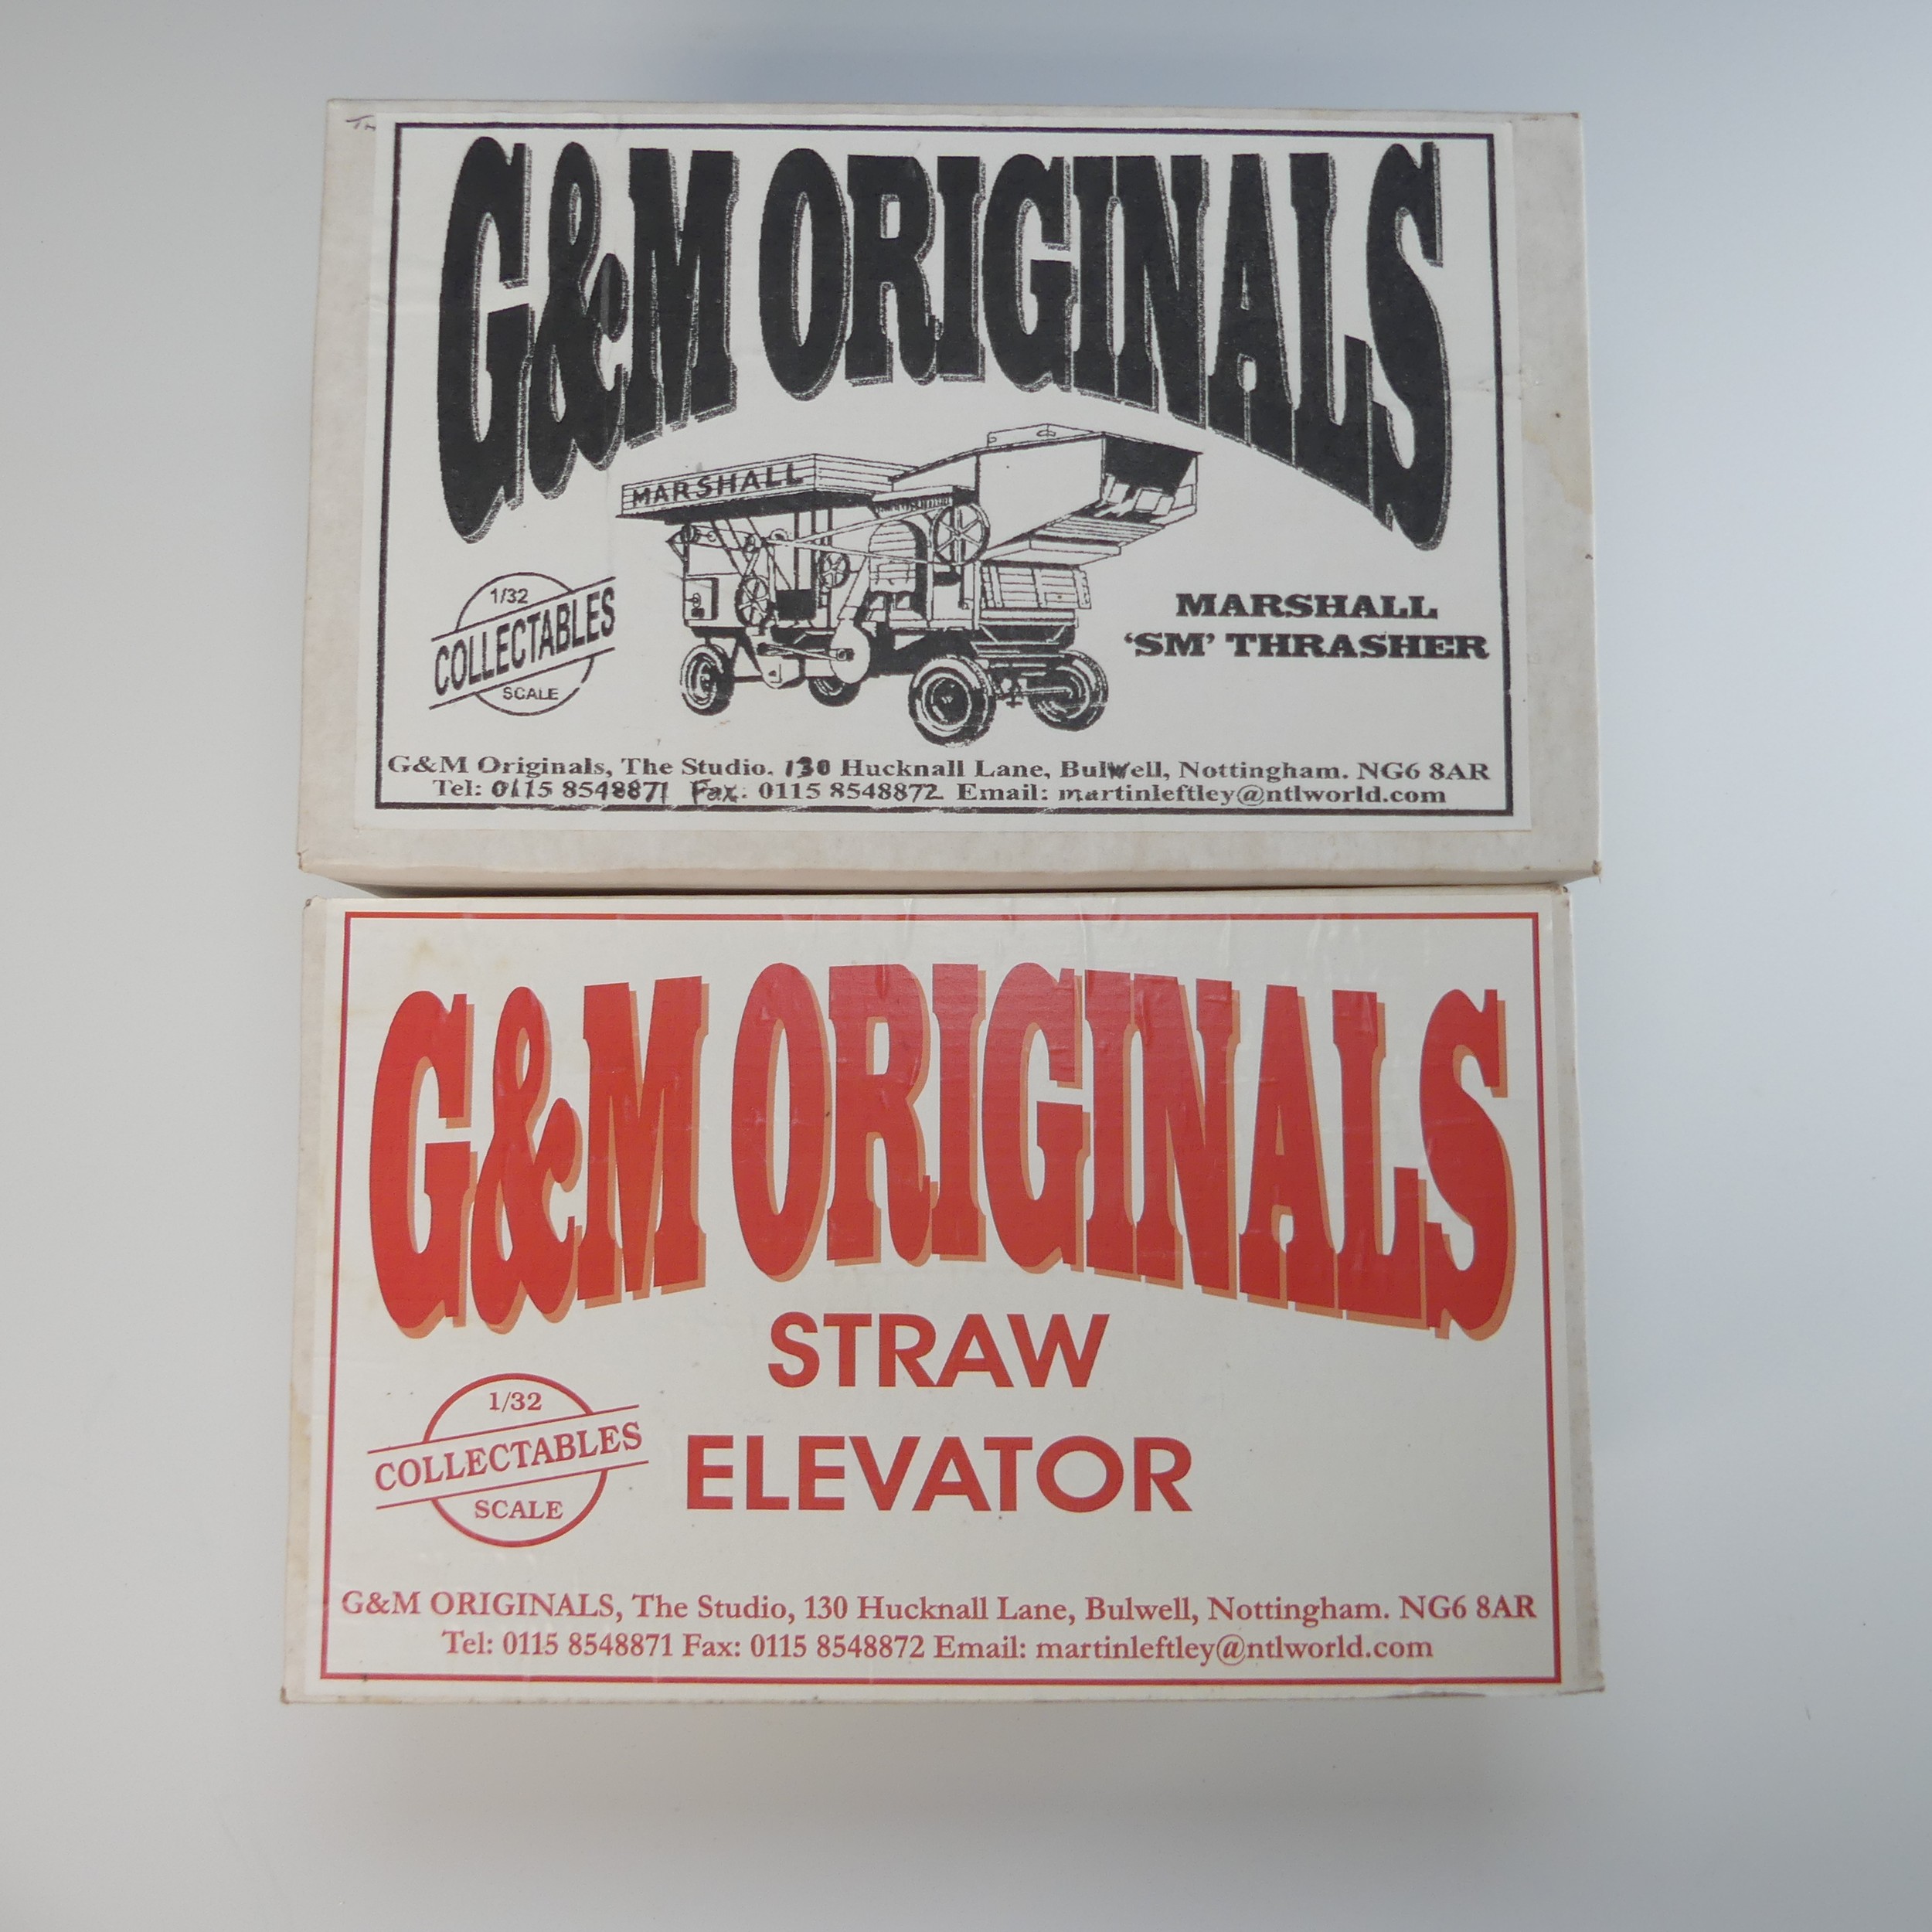 G & M Originals (1/32nd scale) Straw Elevator in salmon, in original box and foam packaging, - Image 3 of 3